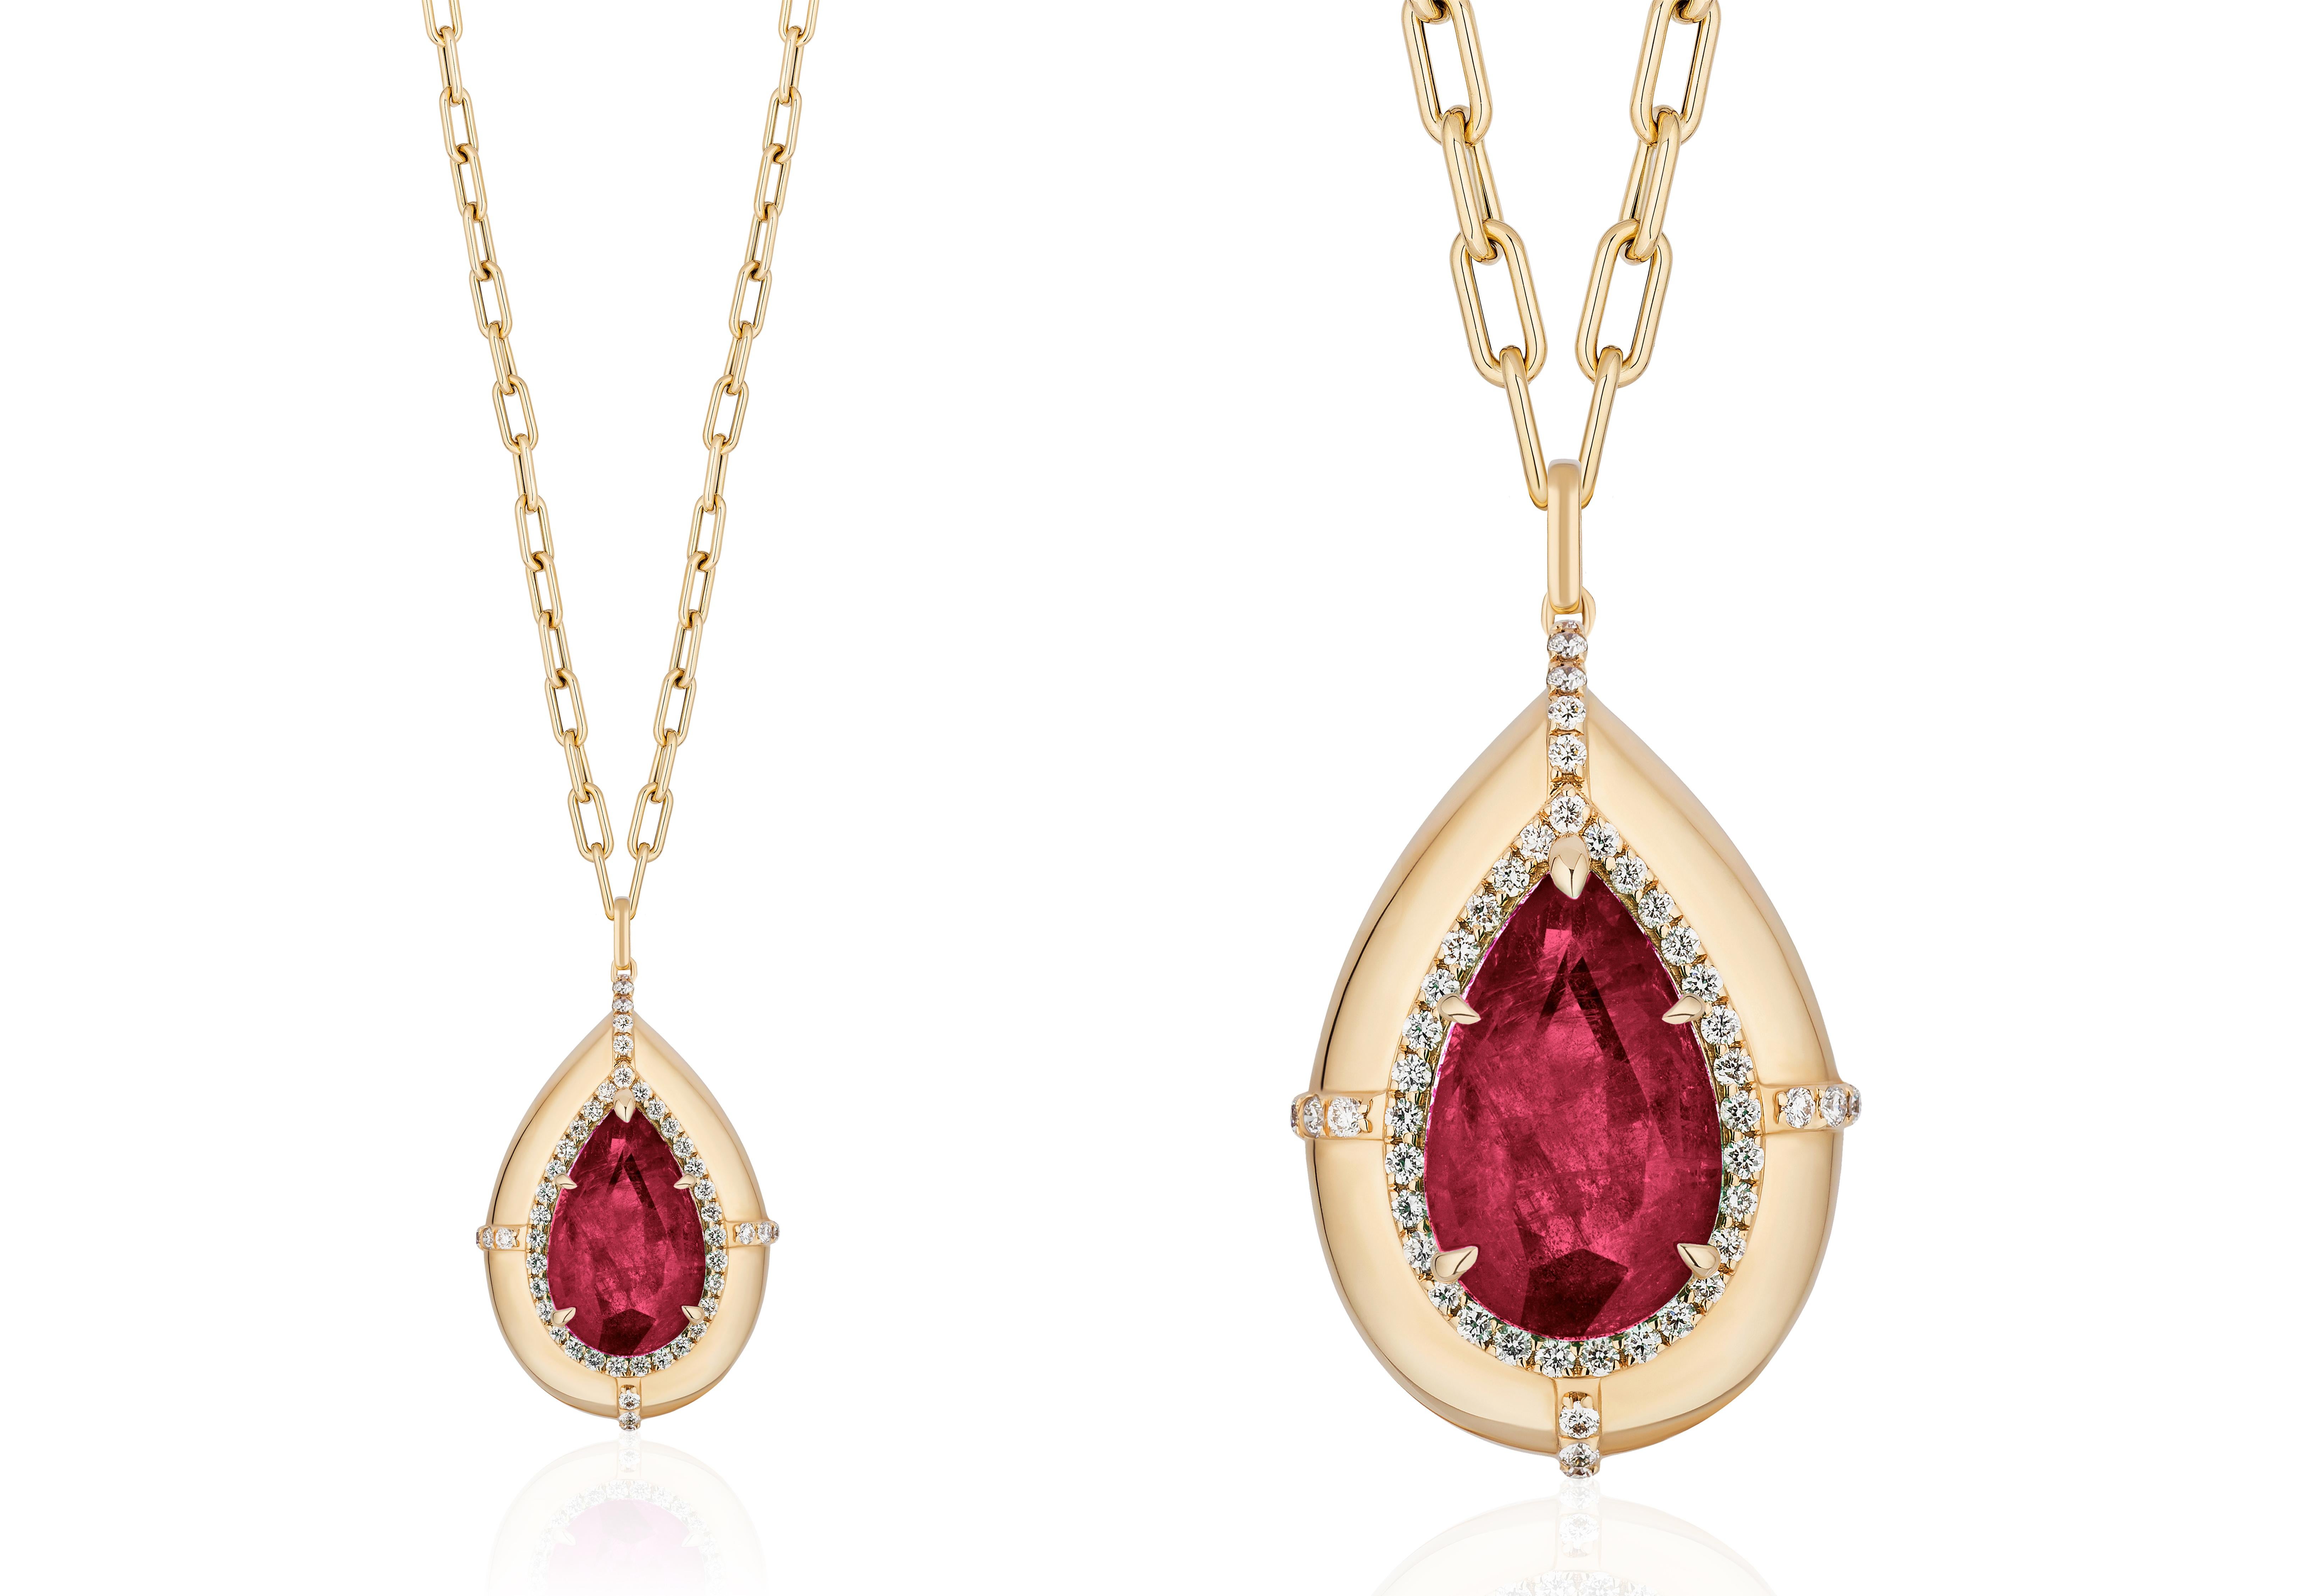 Big Pear Shape Rubelite Pendant with Diamonds in 18K Yellow Gold, from 